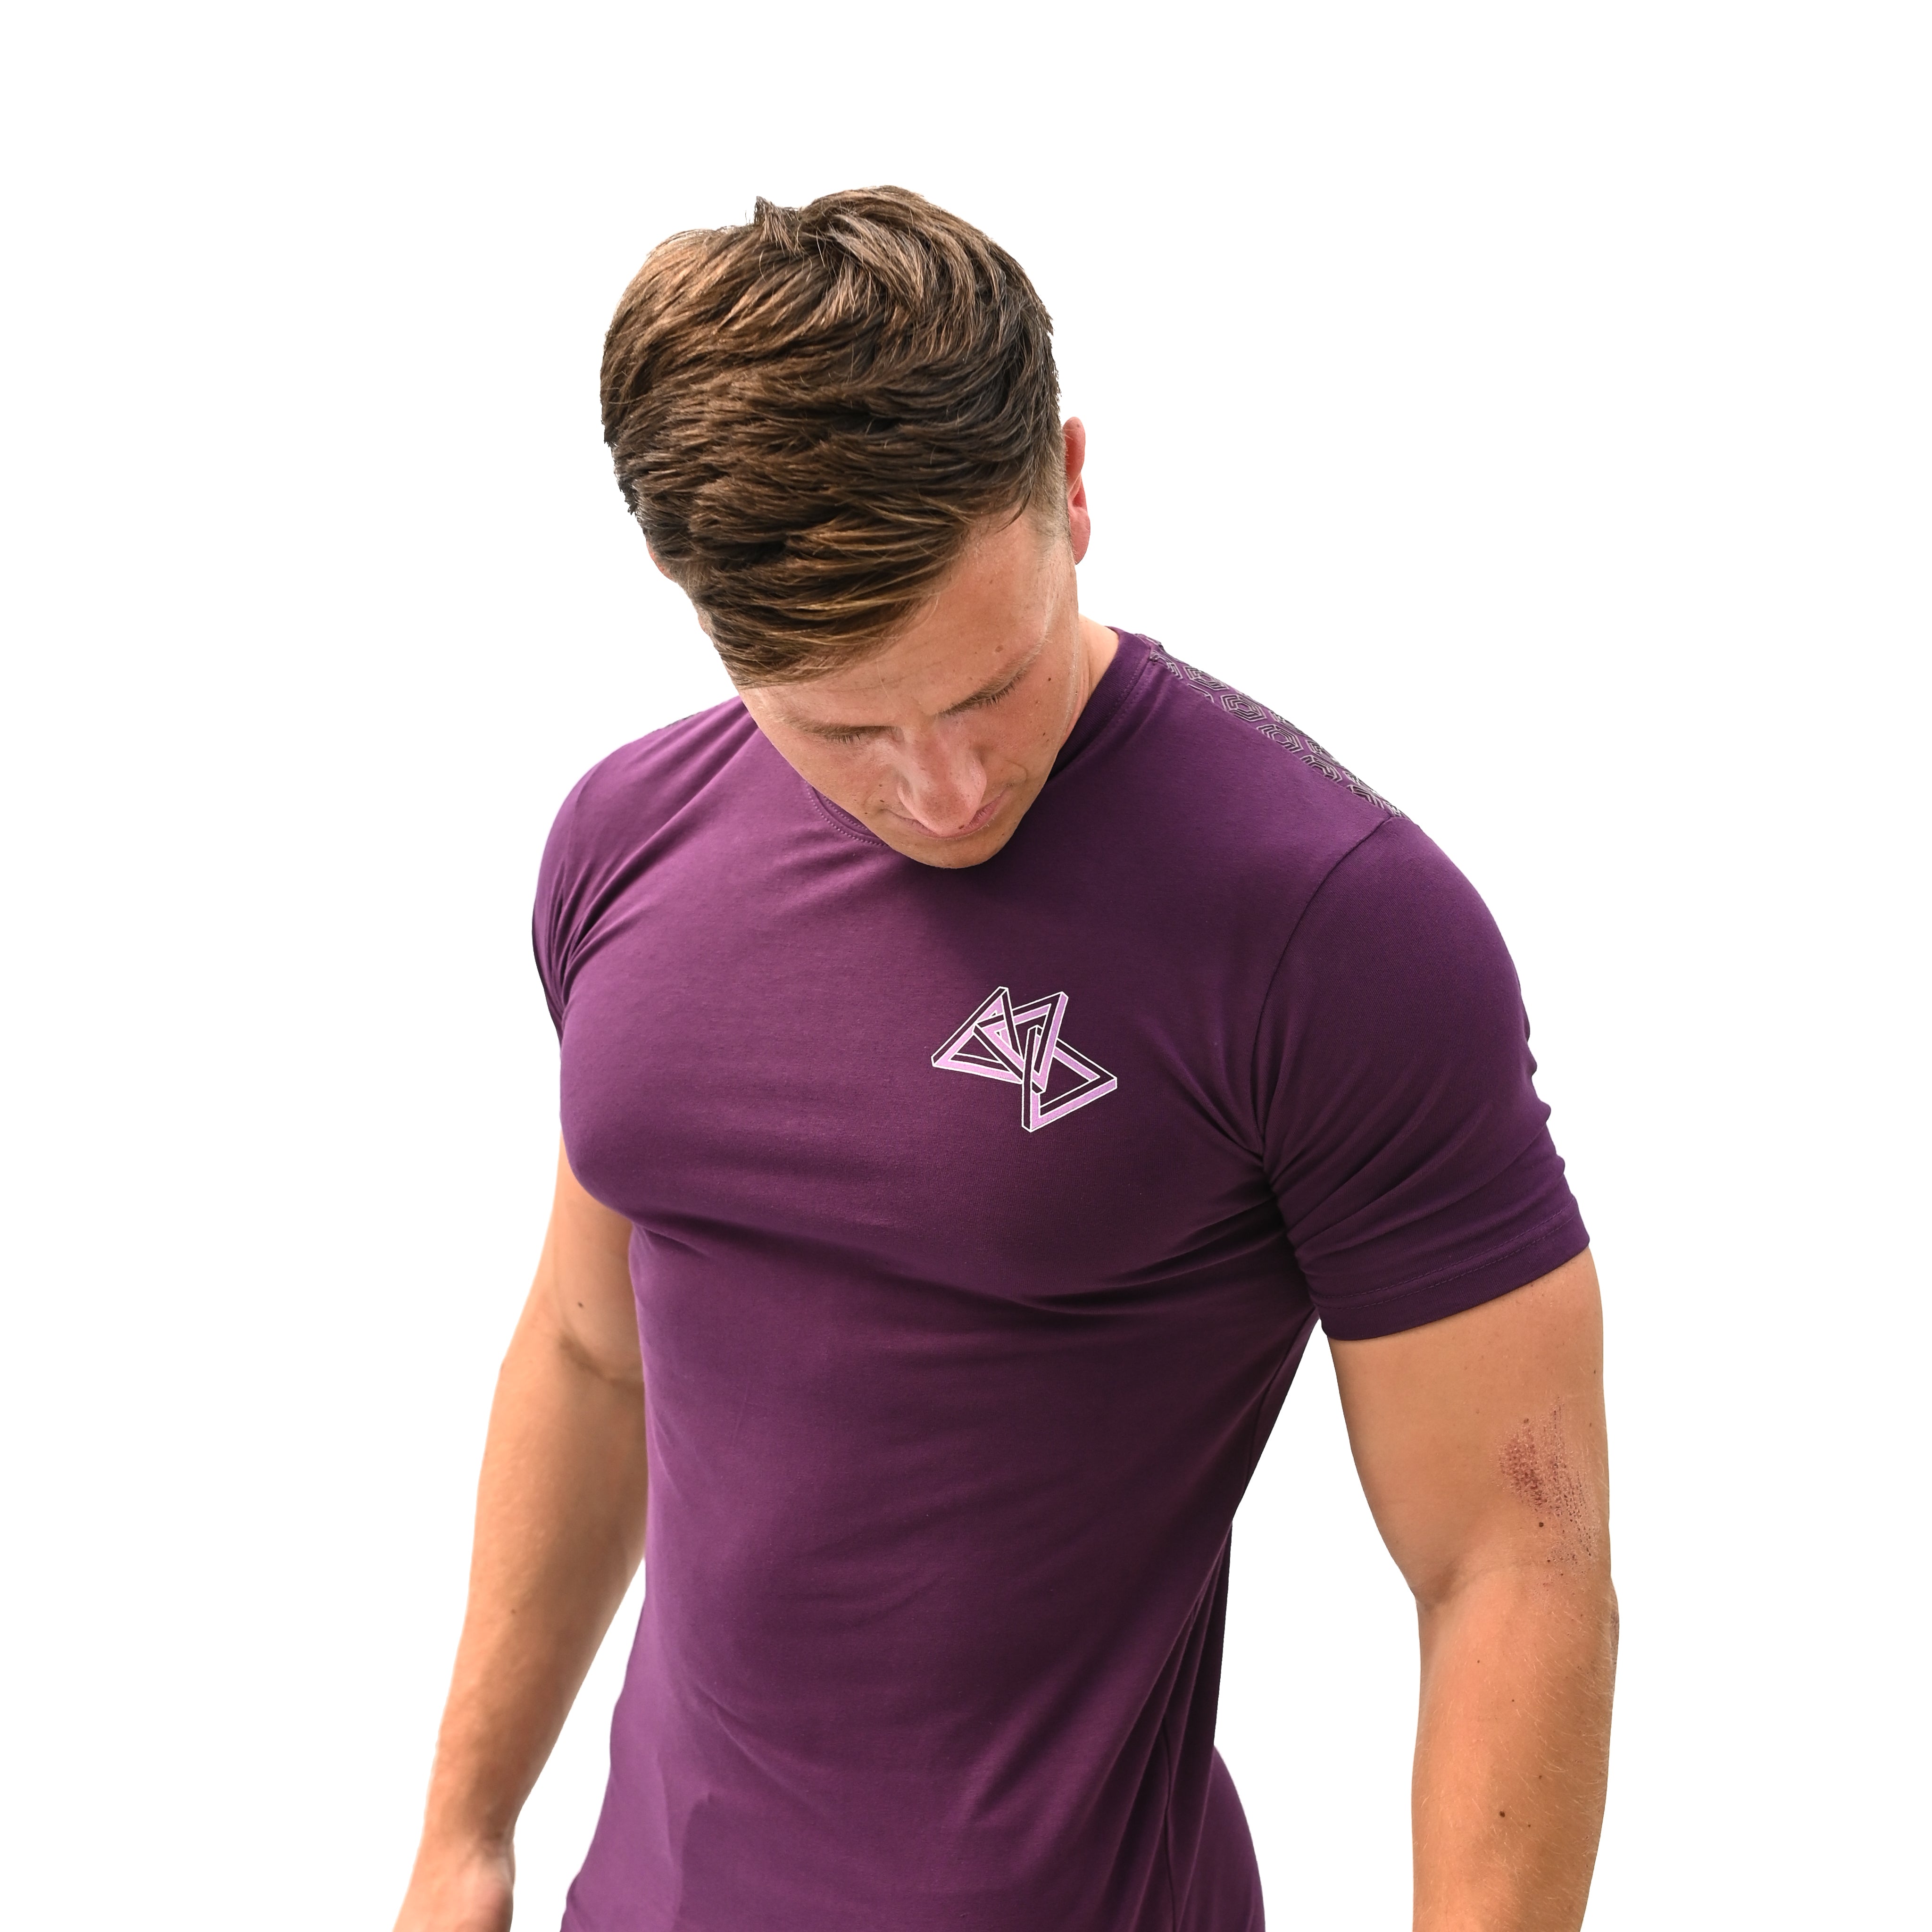 Delta Link Berry Bar Grip T-shirt, great as a squat shirt. Purchase Delta Link Berry Bar Grip Shirt from A7 UK. Purchase Delta Link Berry Bar Grip Shirt Europe from A7 Europe. No more chalk and no more sliding. Best Bar Grip T shirts, shipping to UK and Europe from A7 UK. Delta Link Berry Bar Grip Shirt includes. A7UK has the best Powerlifting apparel for all your workouts. Available in UK and Europe including France, Italy, Germany, the Netherlands, Sweden and Poland.